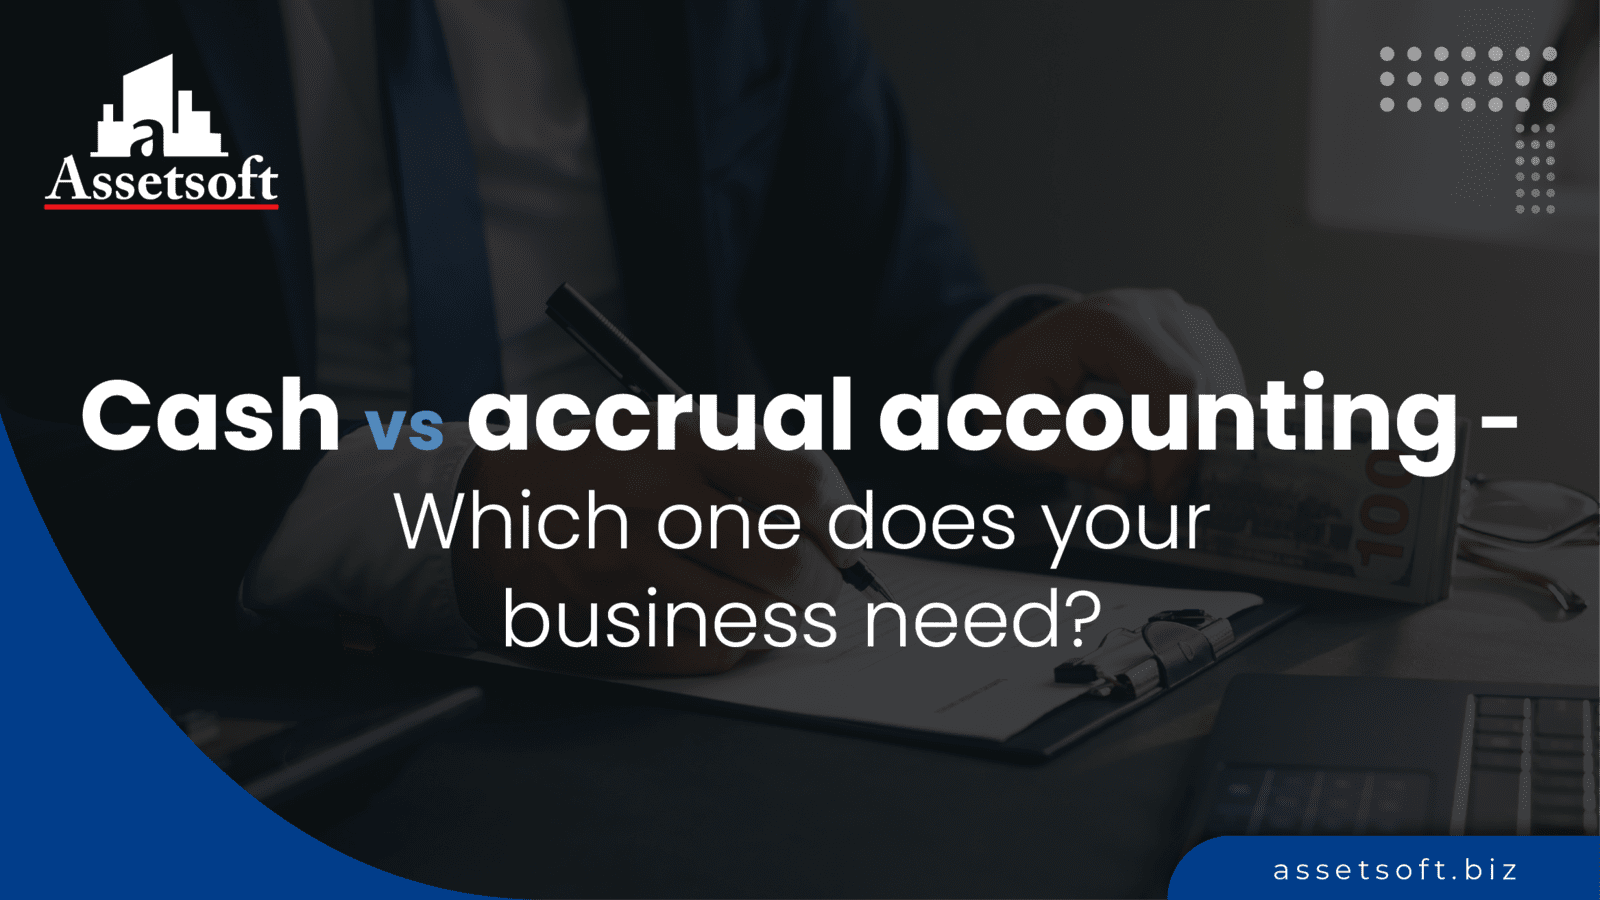 Cash vs accrual accounting - Which one does your business need? 